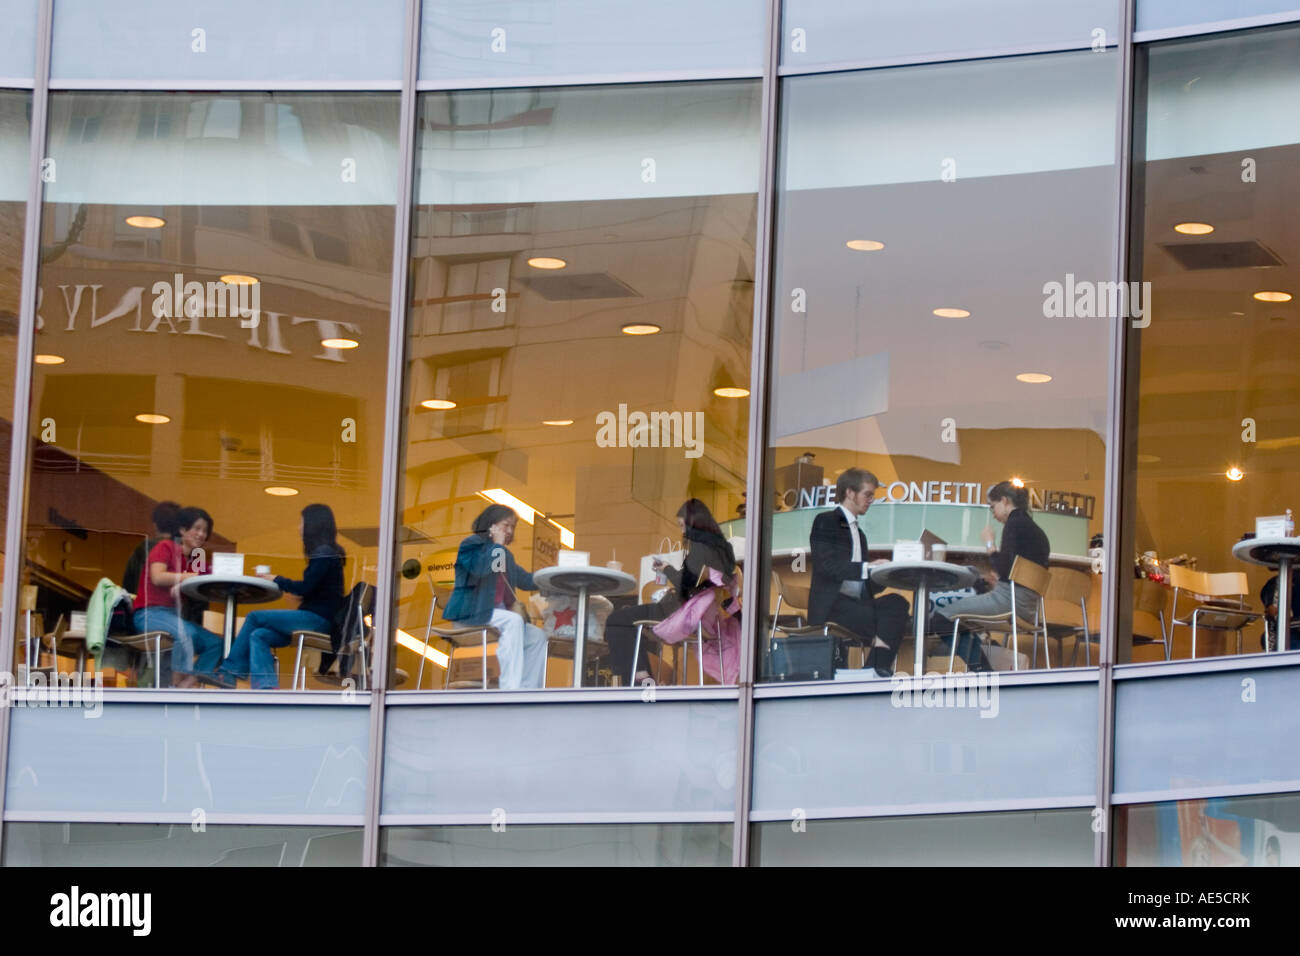 People taking a break from shopping at department store cafe as seen from exterior through windows Stock Photo